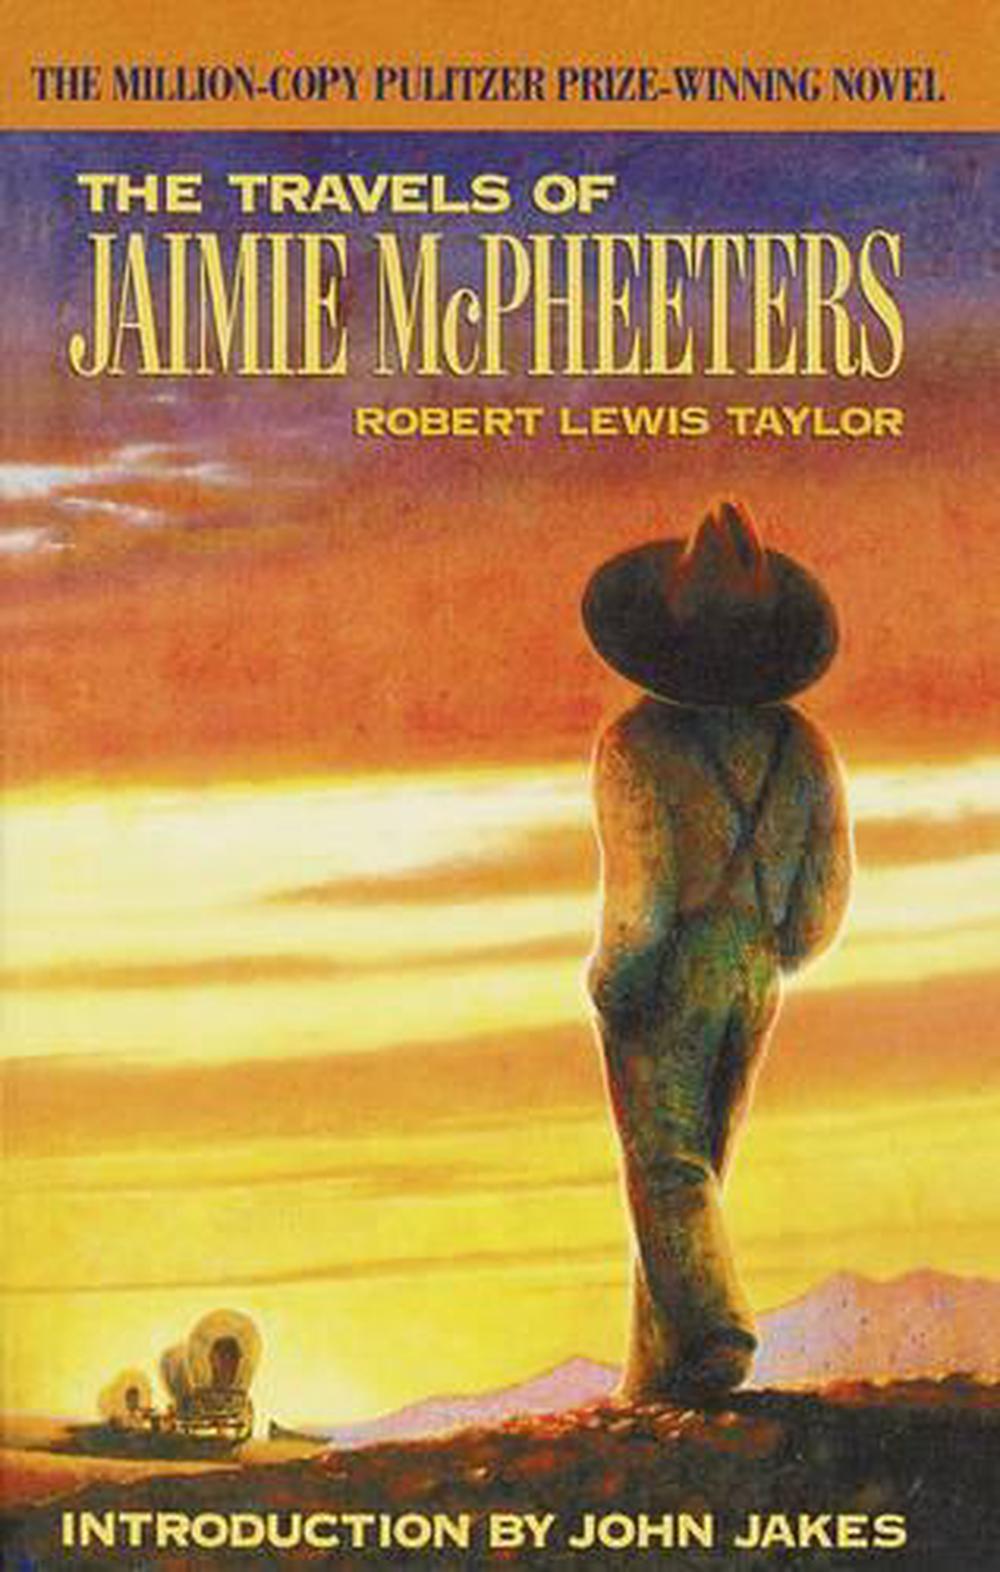 The Travels of Jaimie McPheeters by Robert Lewis Taylor